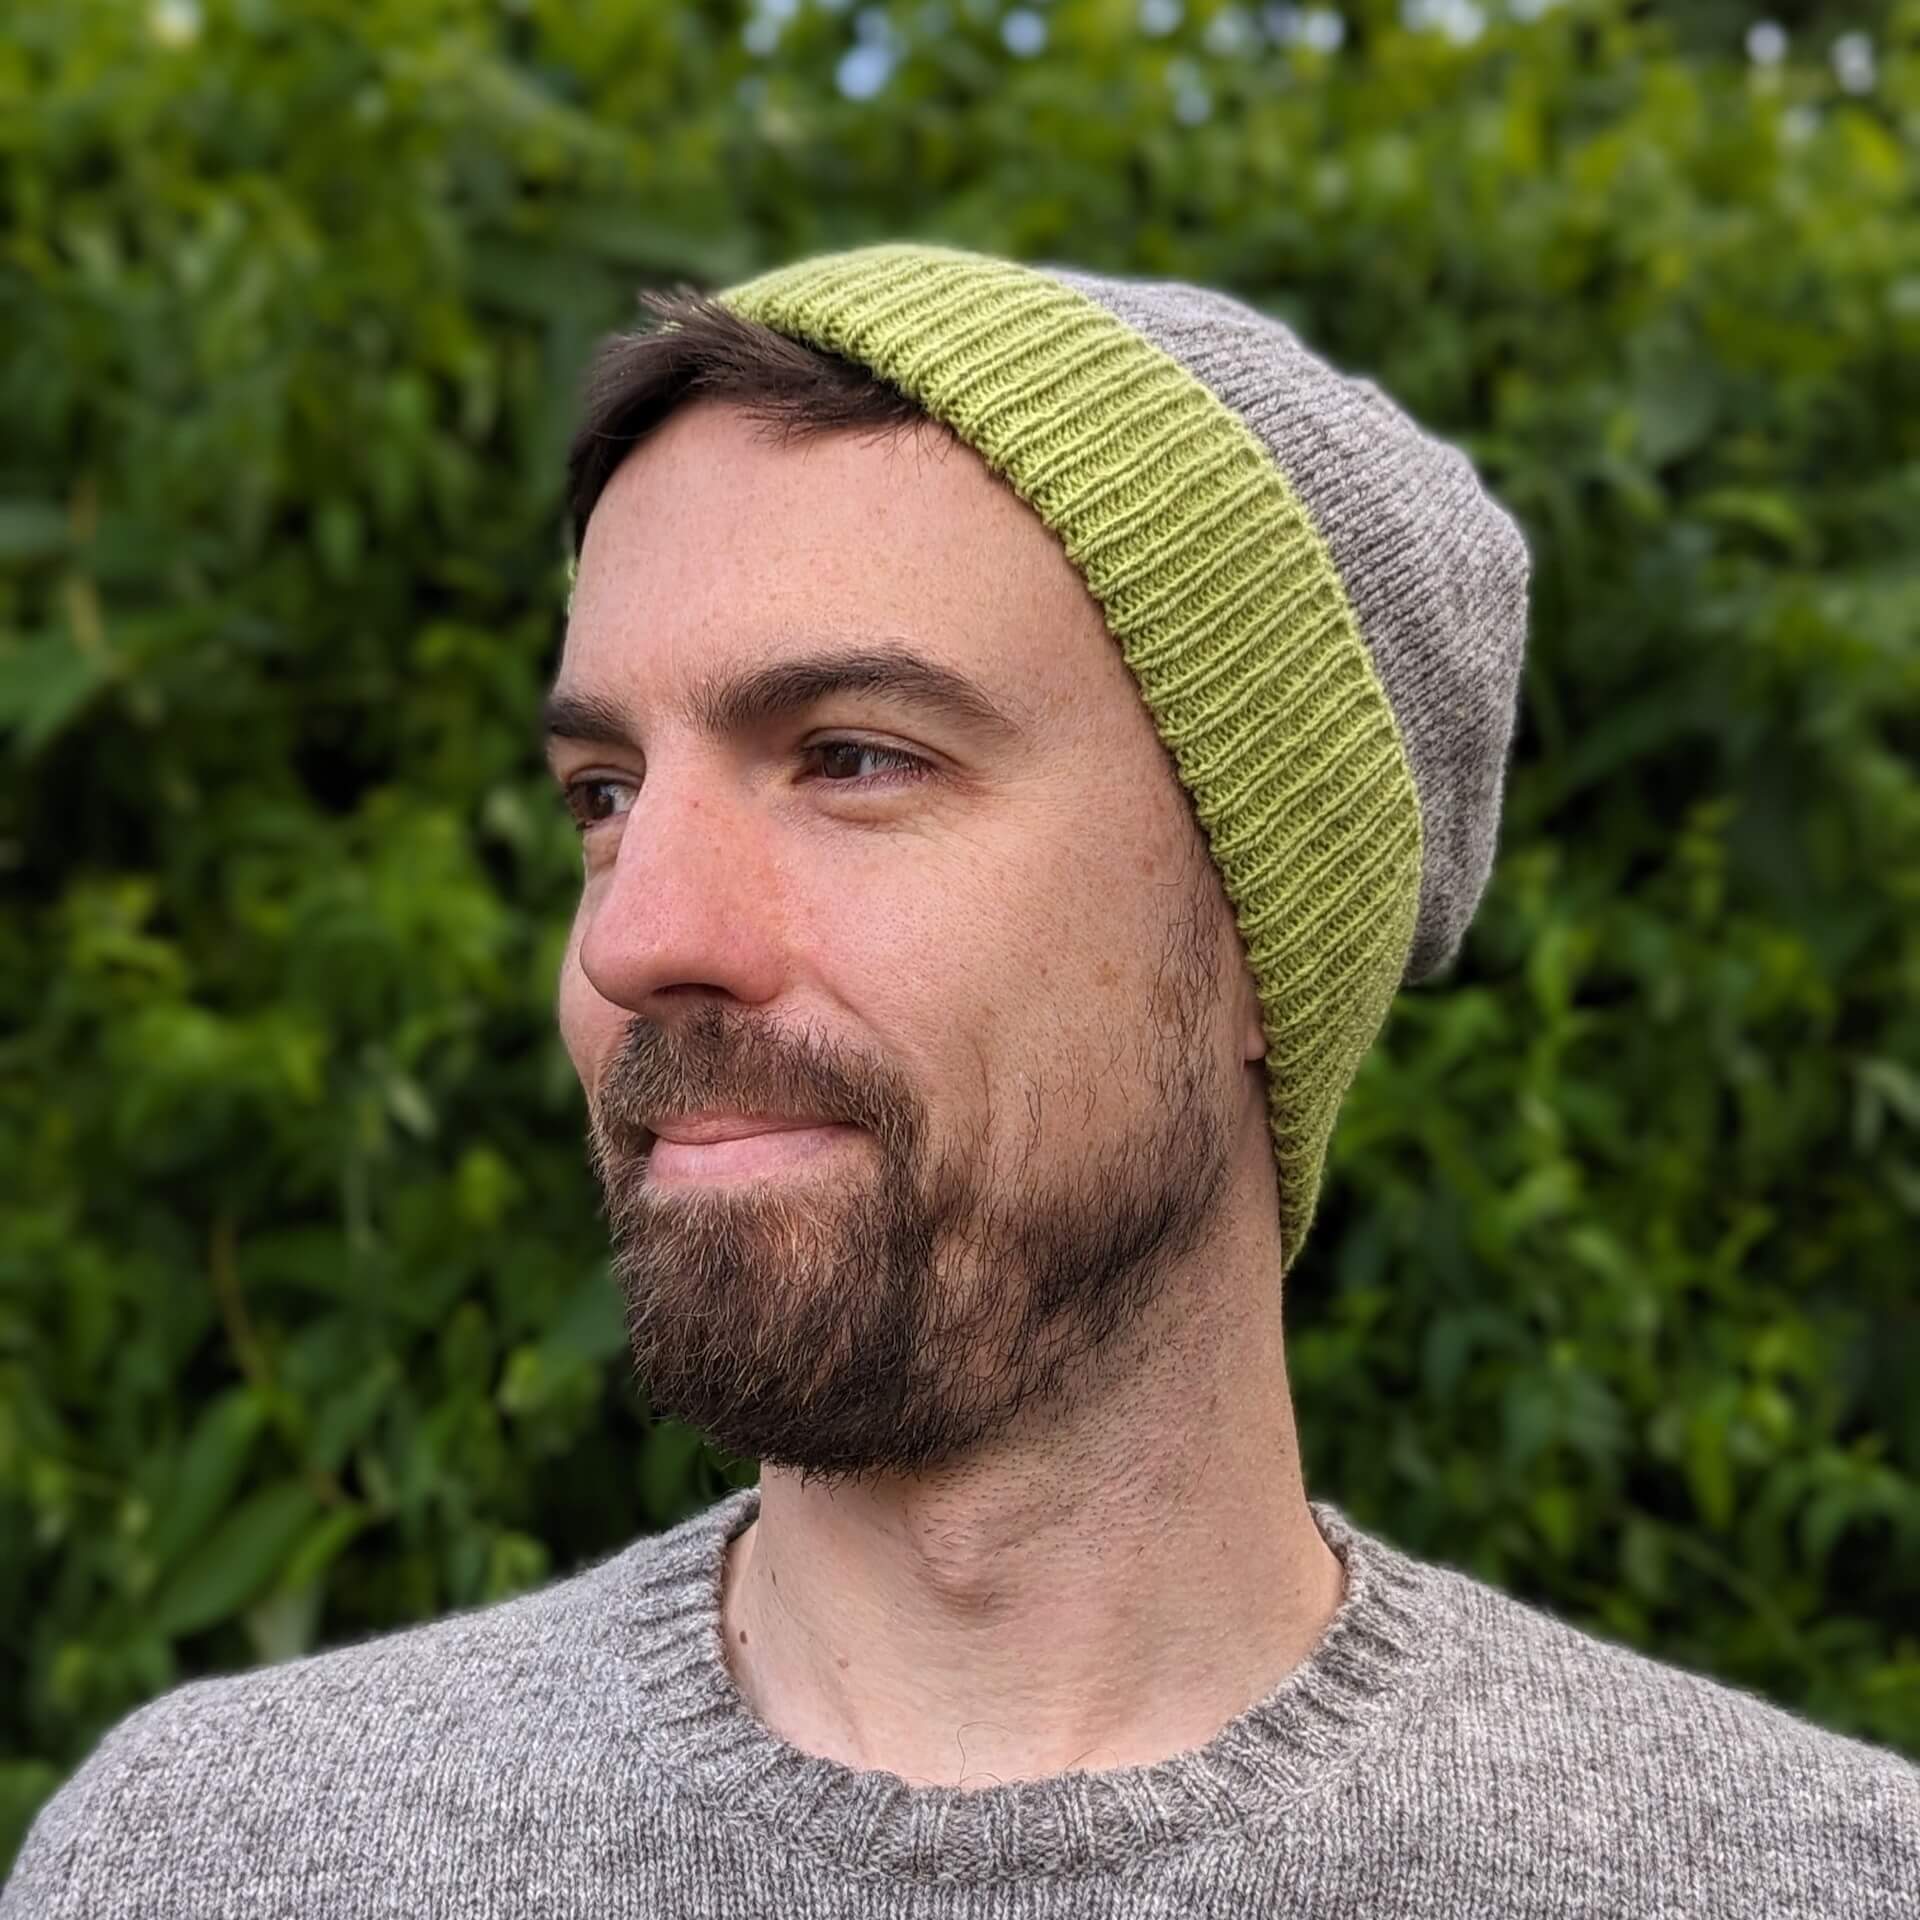 Ria Burns Hat Naturally Dyed Beanie - Weld Green and Grey 100% Lambswool